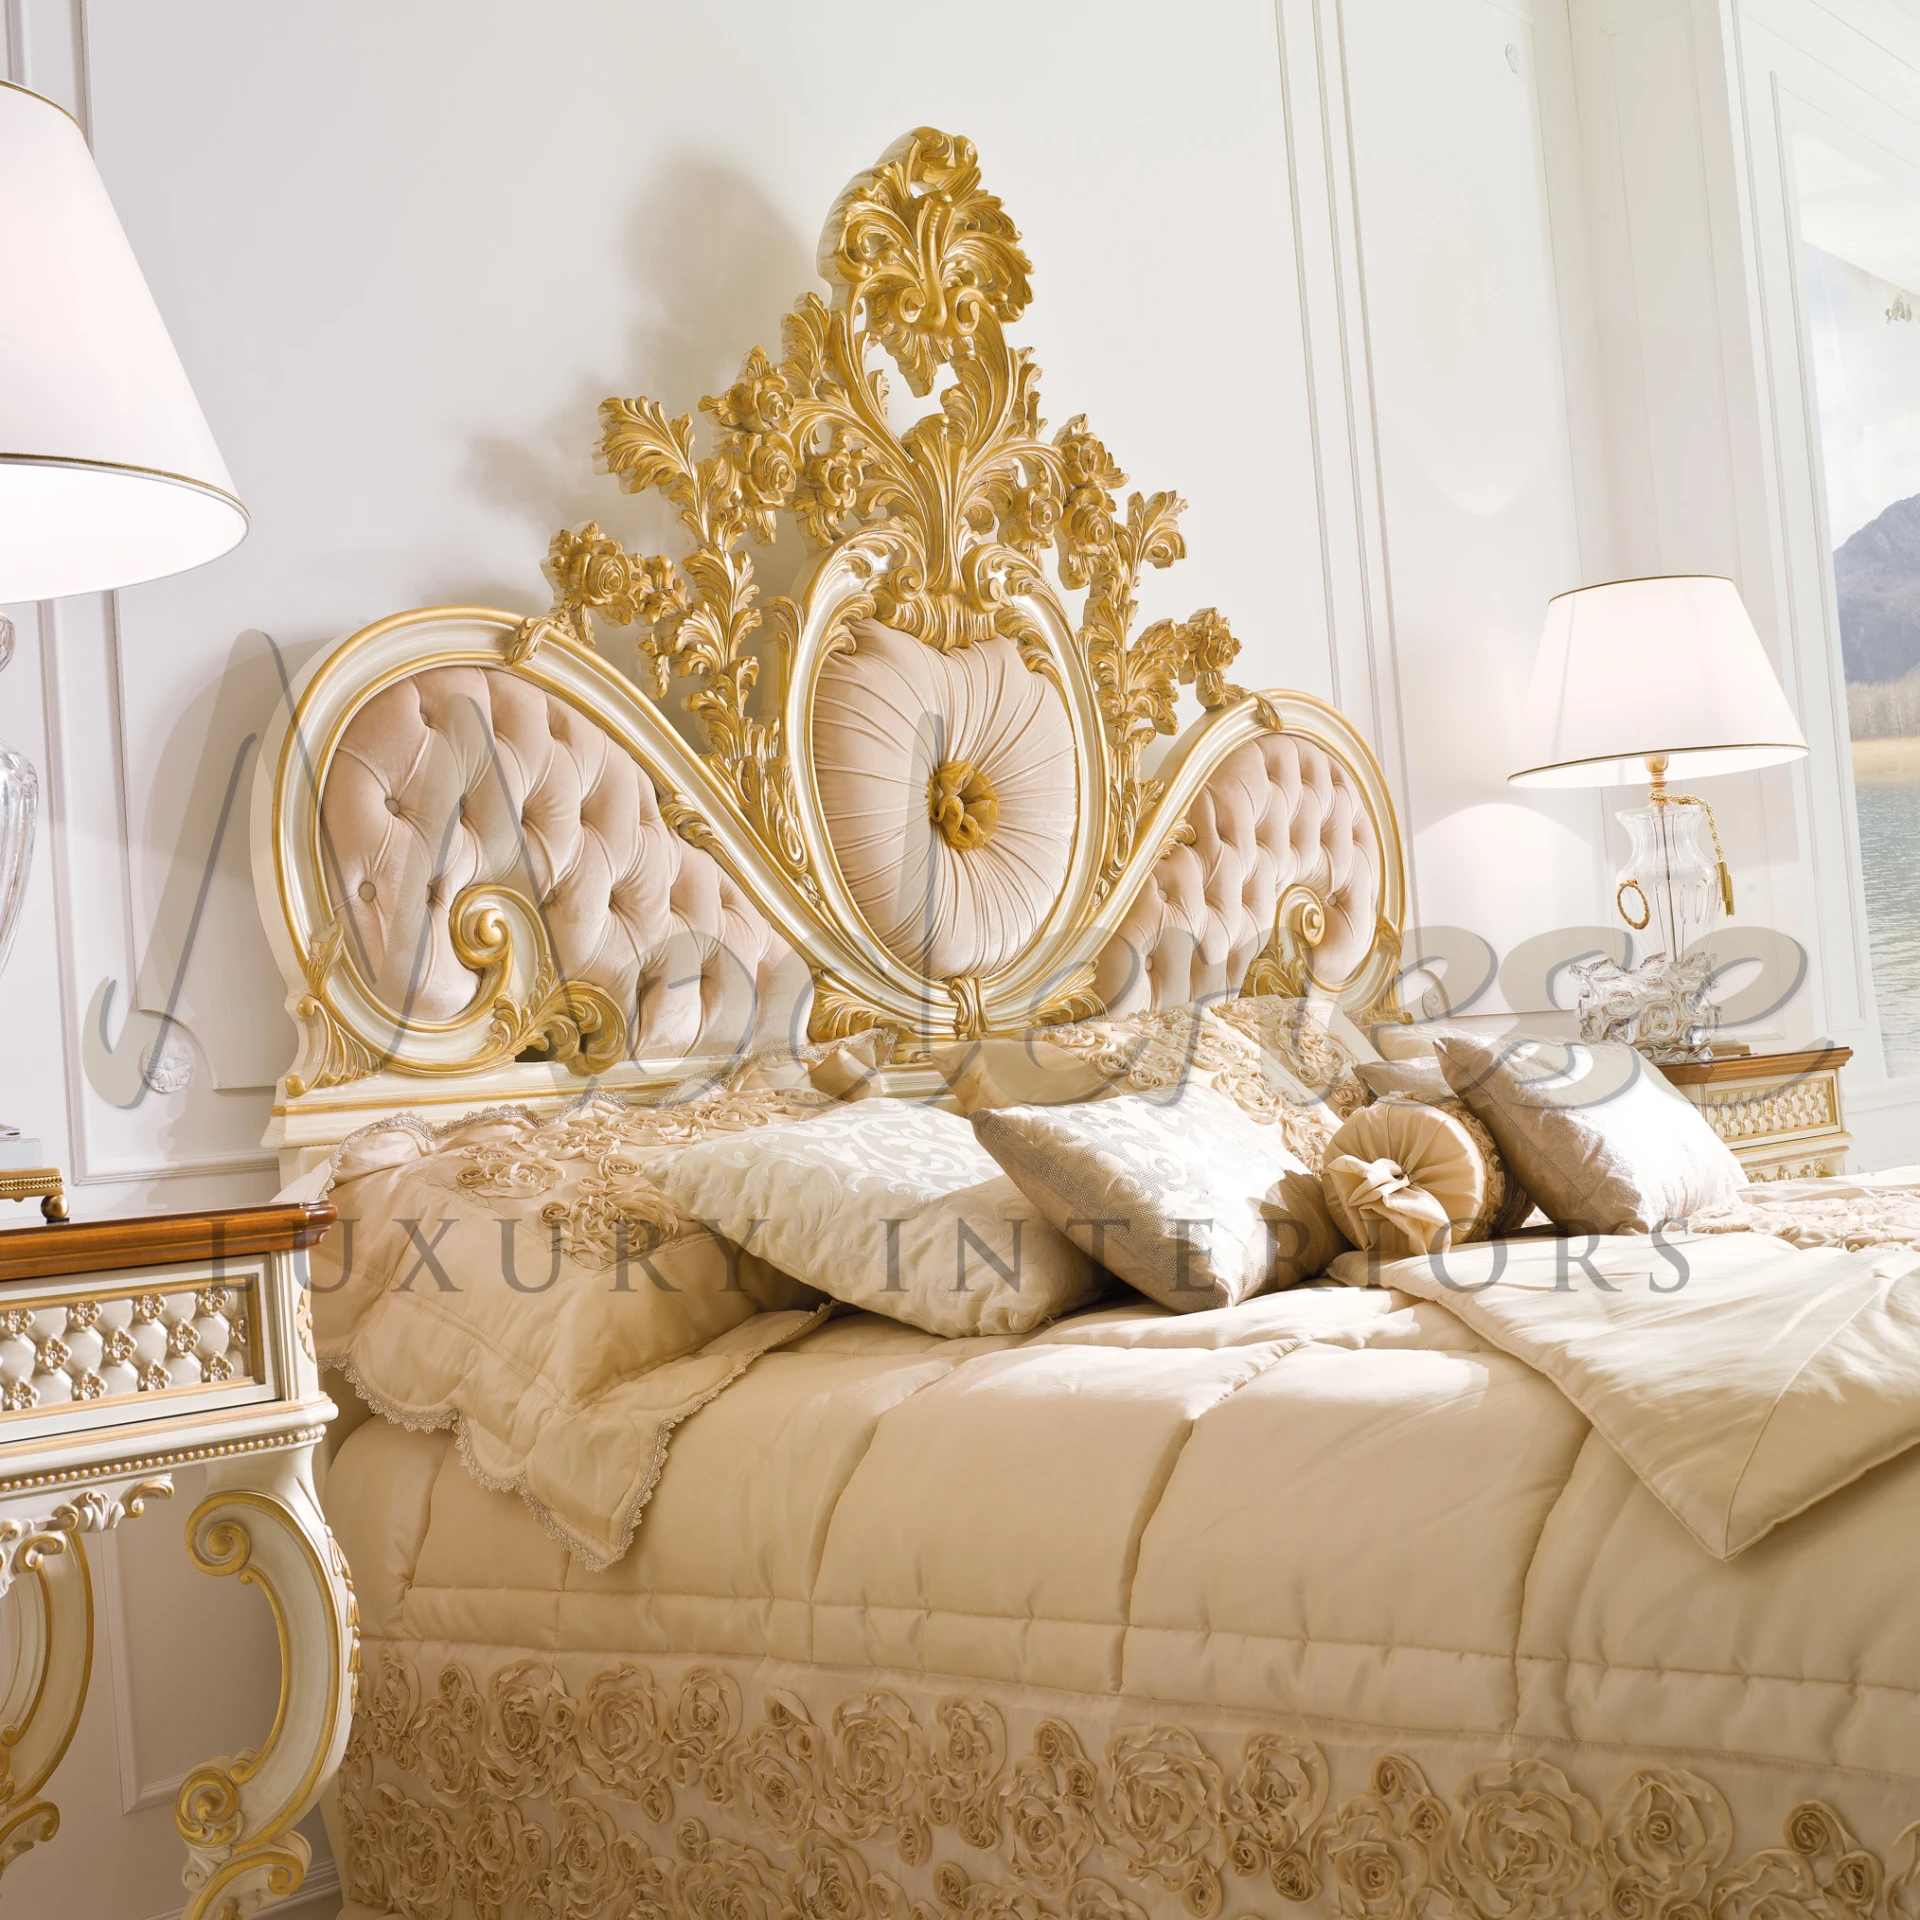 Experience the allure of aristocracy with our Royal Style Double Bed. Immerse yourself in opulence and refinement for a restful night's sleep.